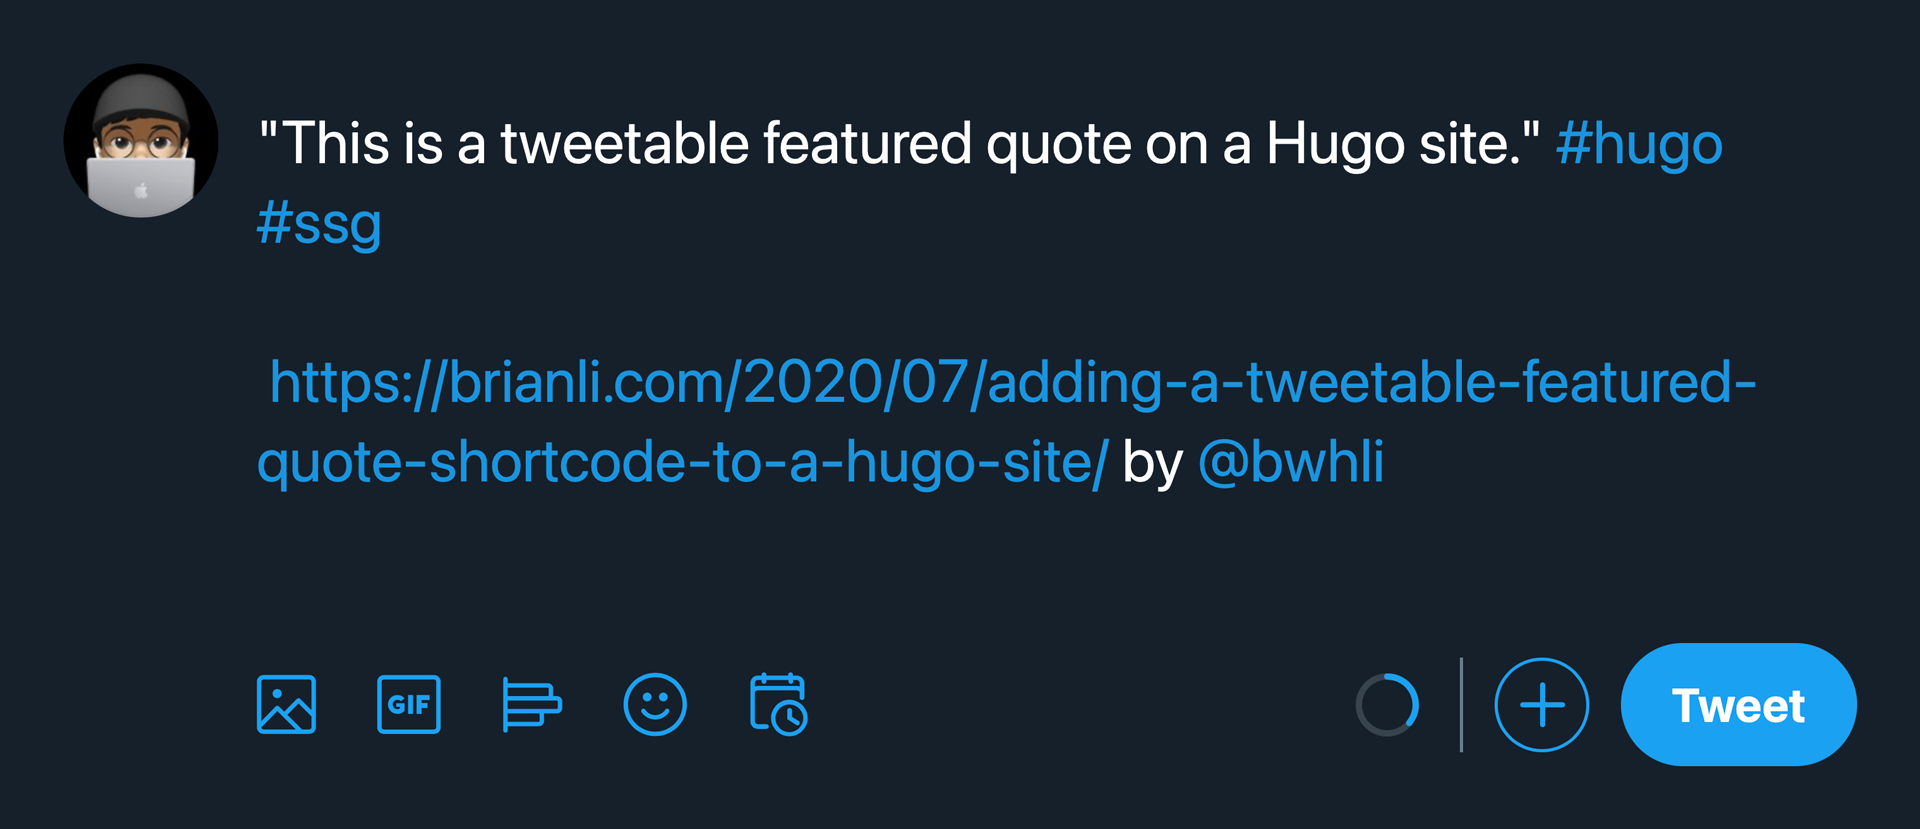 A tweetable feature quote shortcode in Hugo.